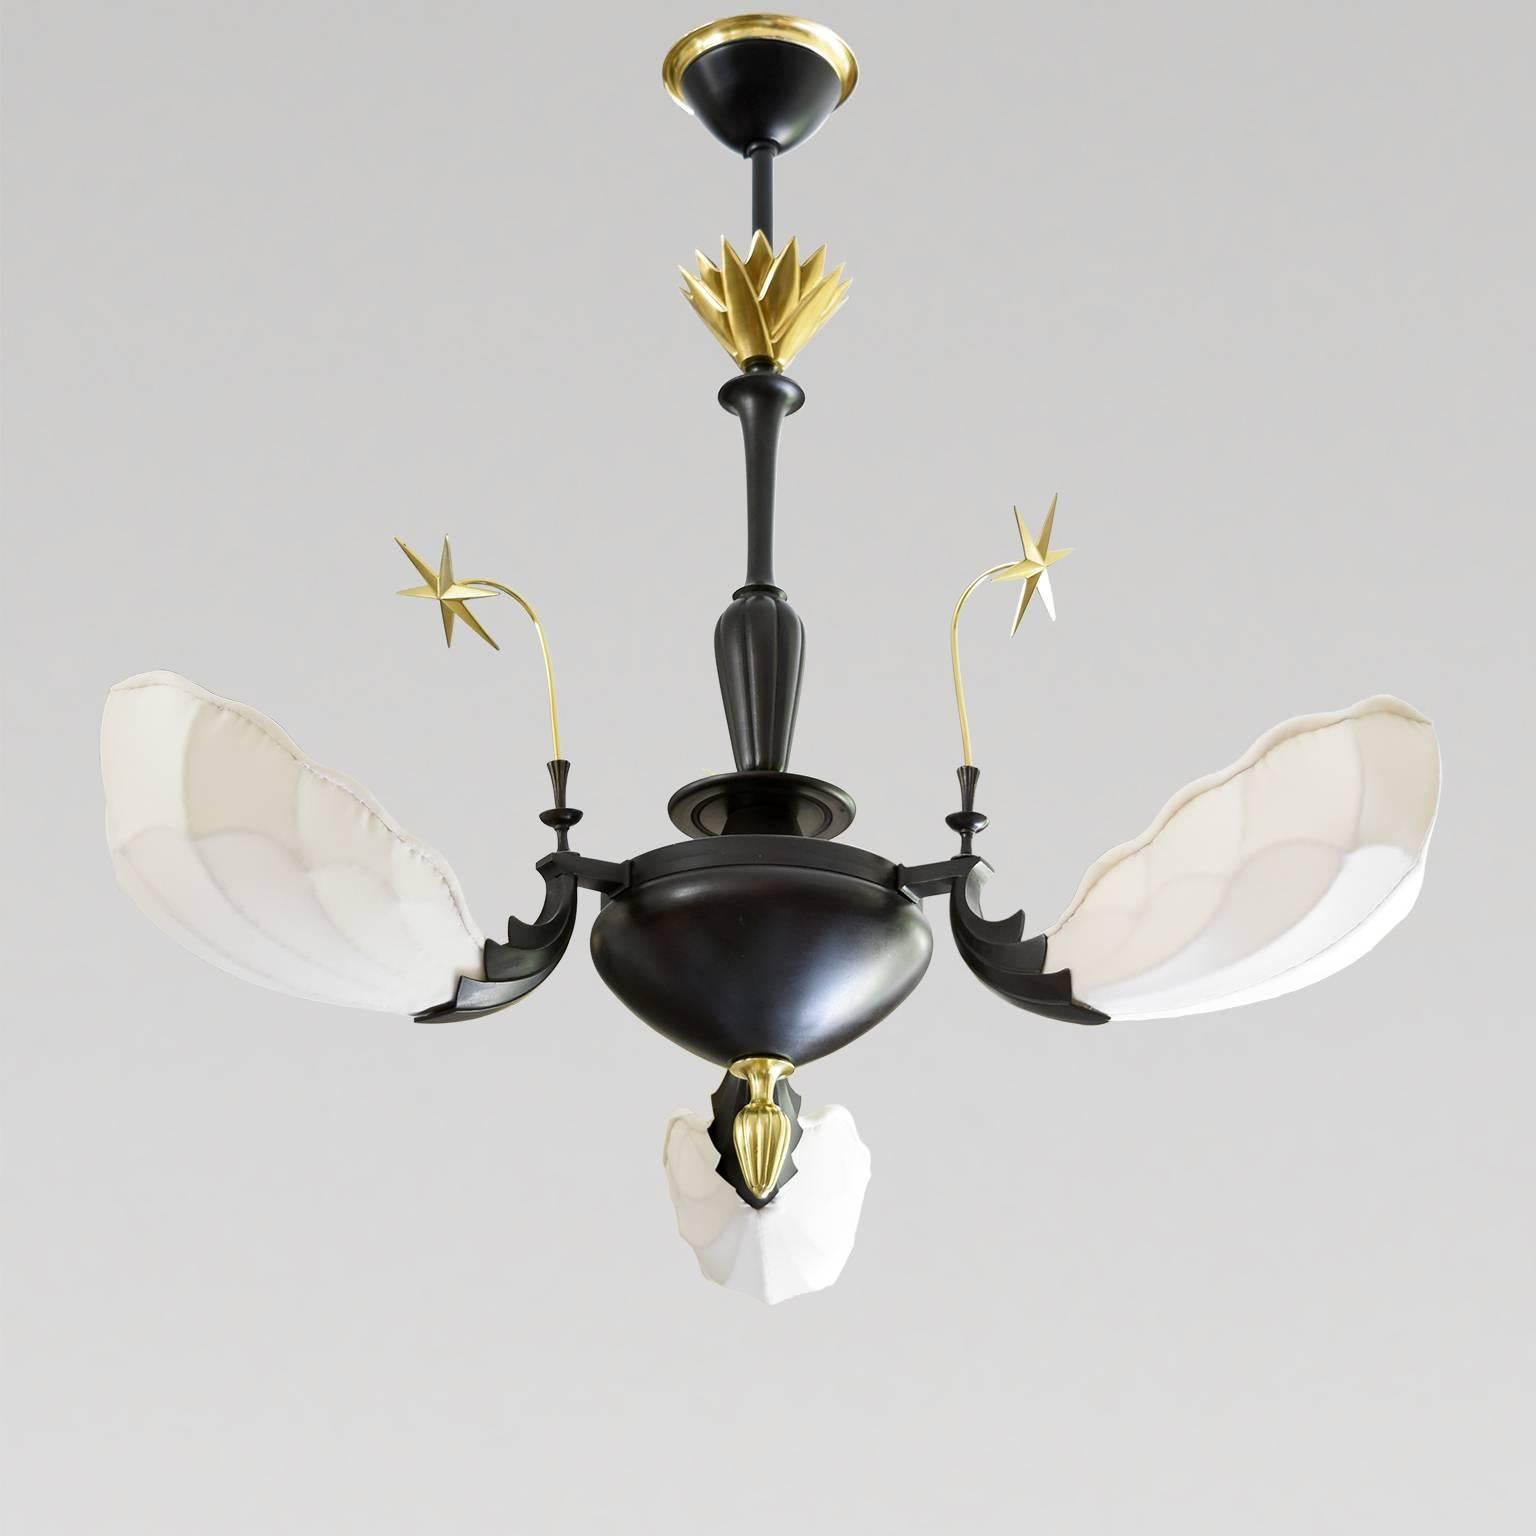 Scandinavian Modern, Art Deco Patinated and Polished Brass Three-Arm Chandelier In Excellent Condition For Sale In New York, NY